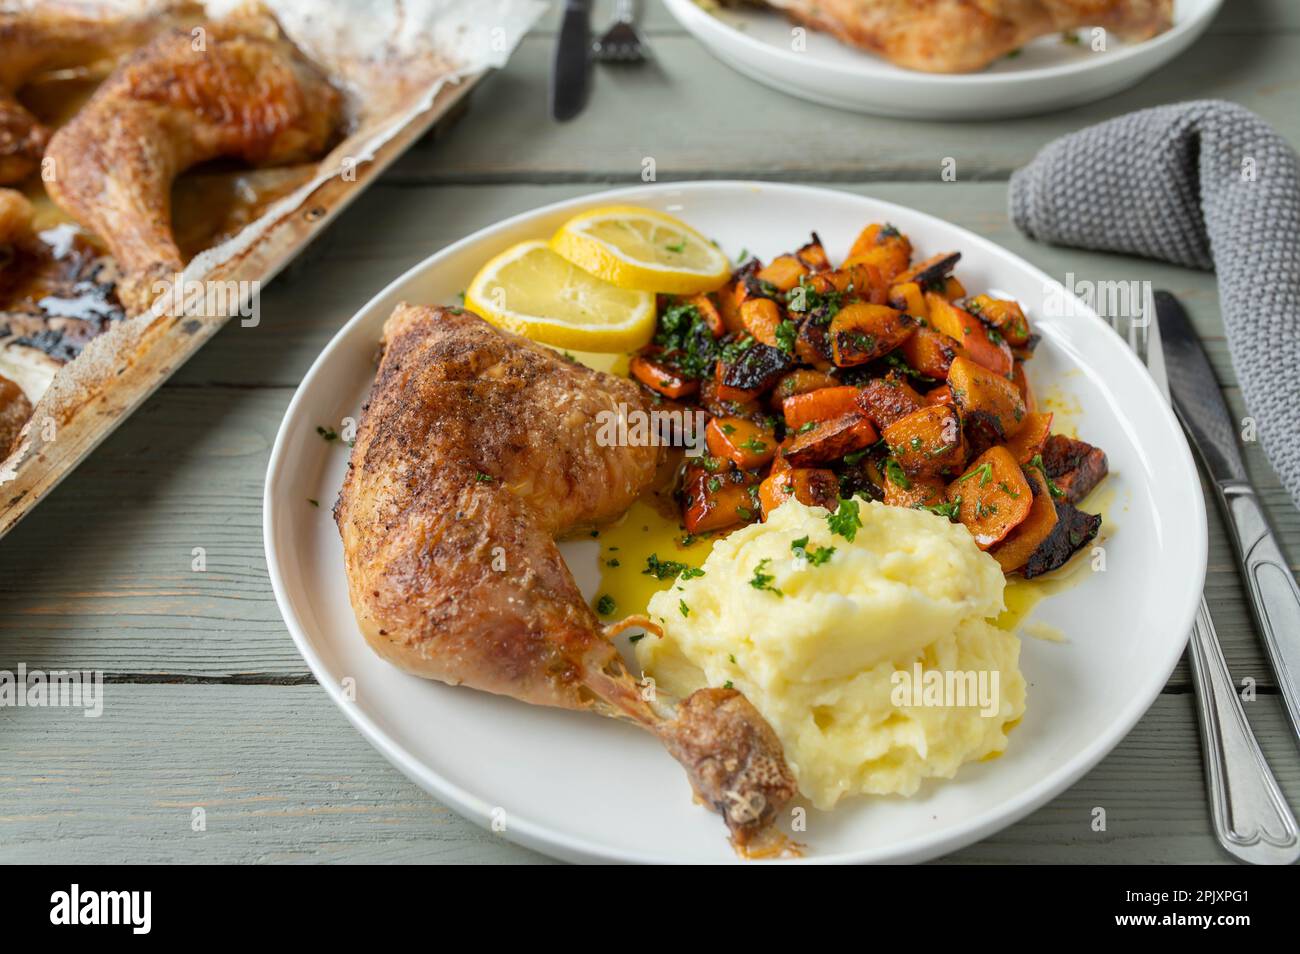 Oven baked chicken leg with marinated pumpkin salad and mashed potatoes on a plate Stock Photo